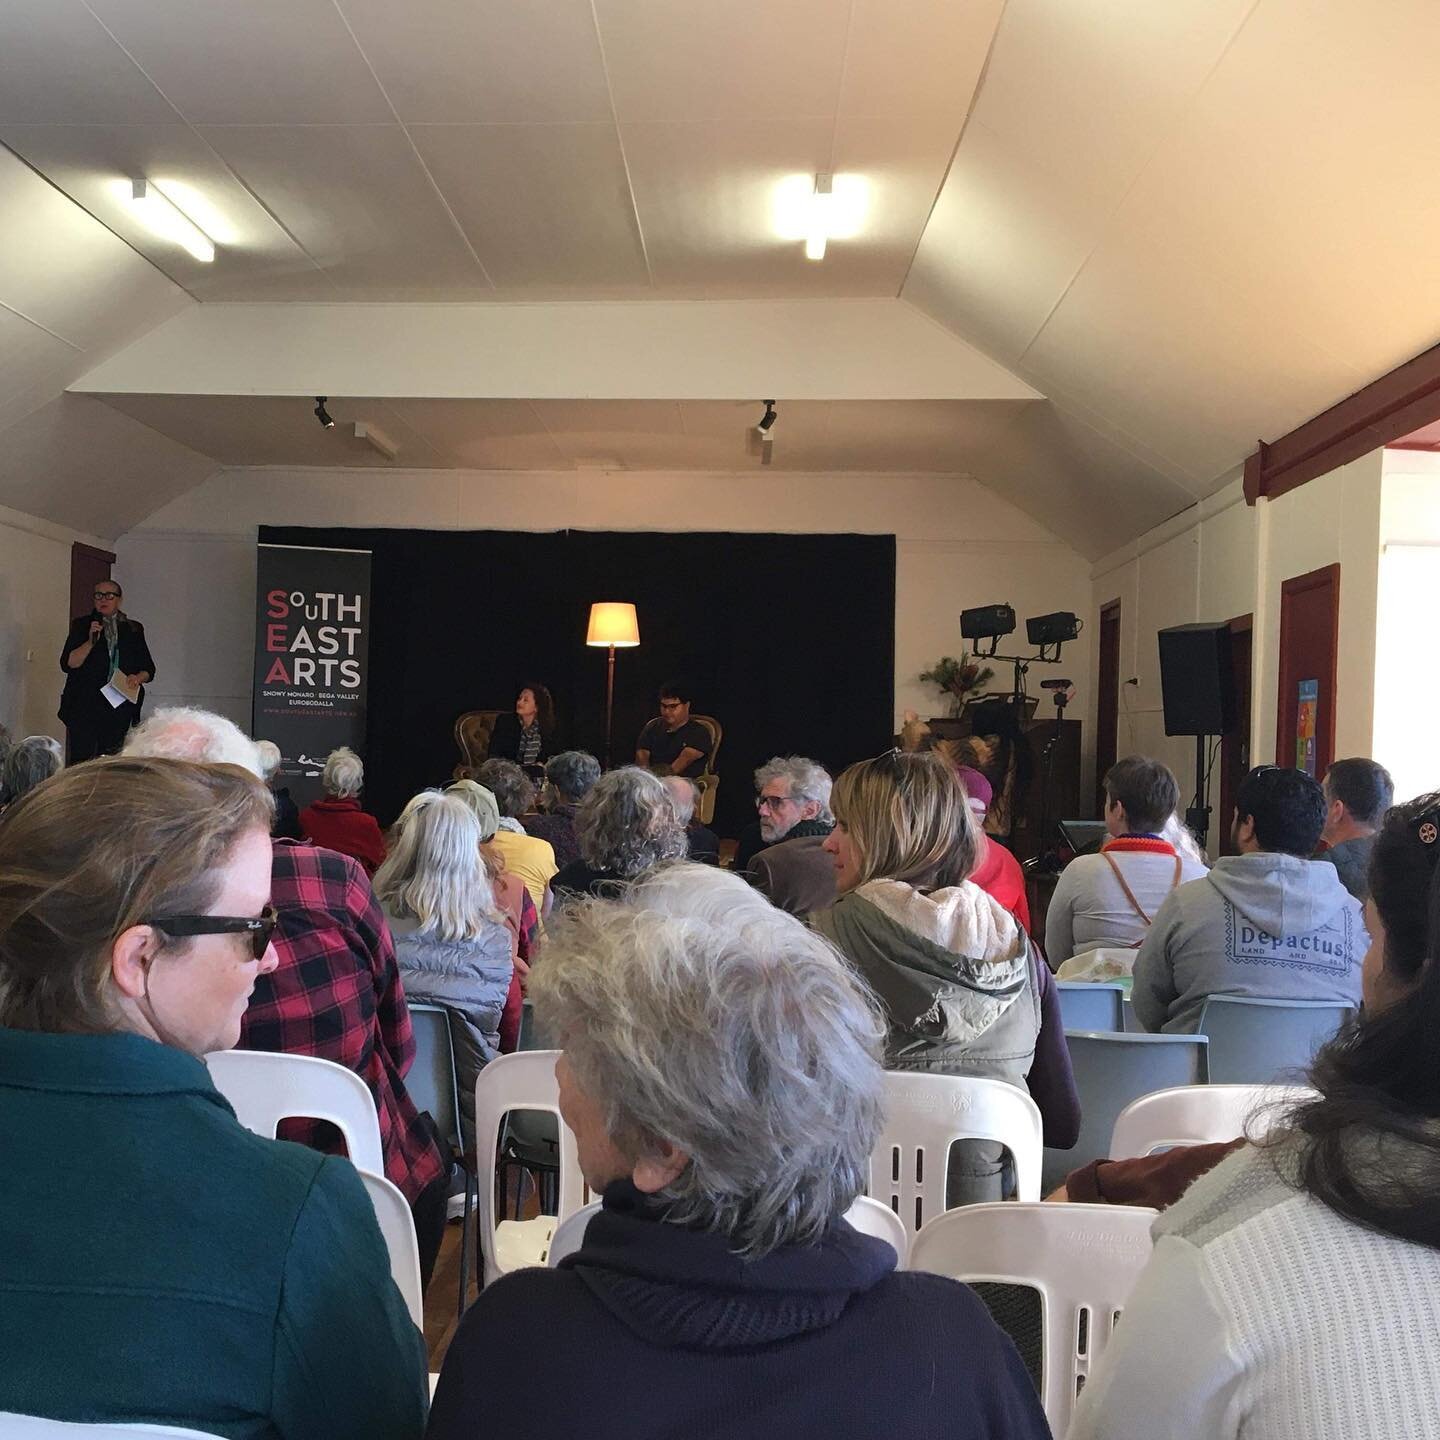 That&rsquo;s a wrap for me at the first #headlandwritersfestival at Tathra! Had a great chat with @gabbiestroud today 😊 so special to be a part of a writer&rsquo;s festival in my hometown! ❤️🎉 @southeastarts